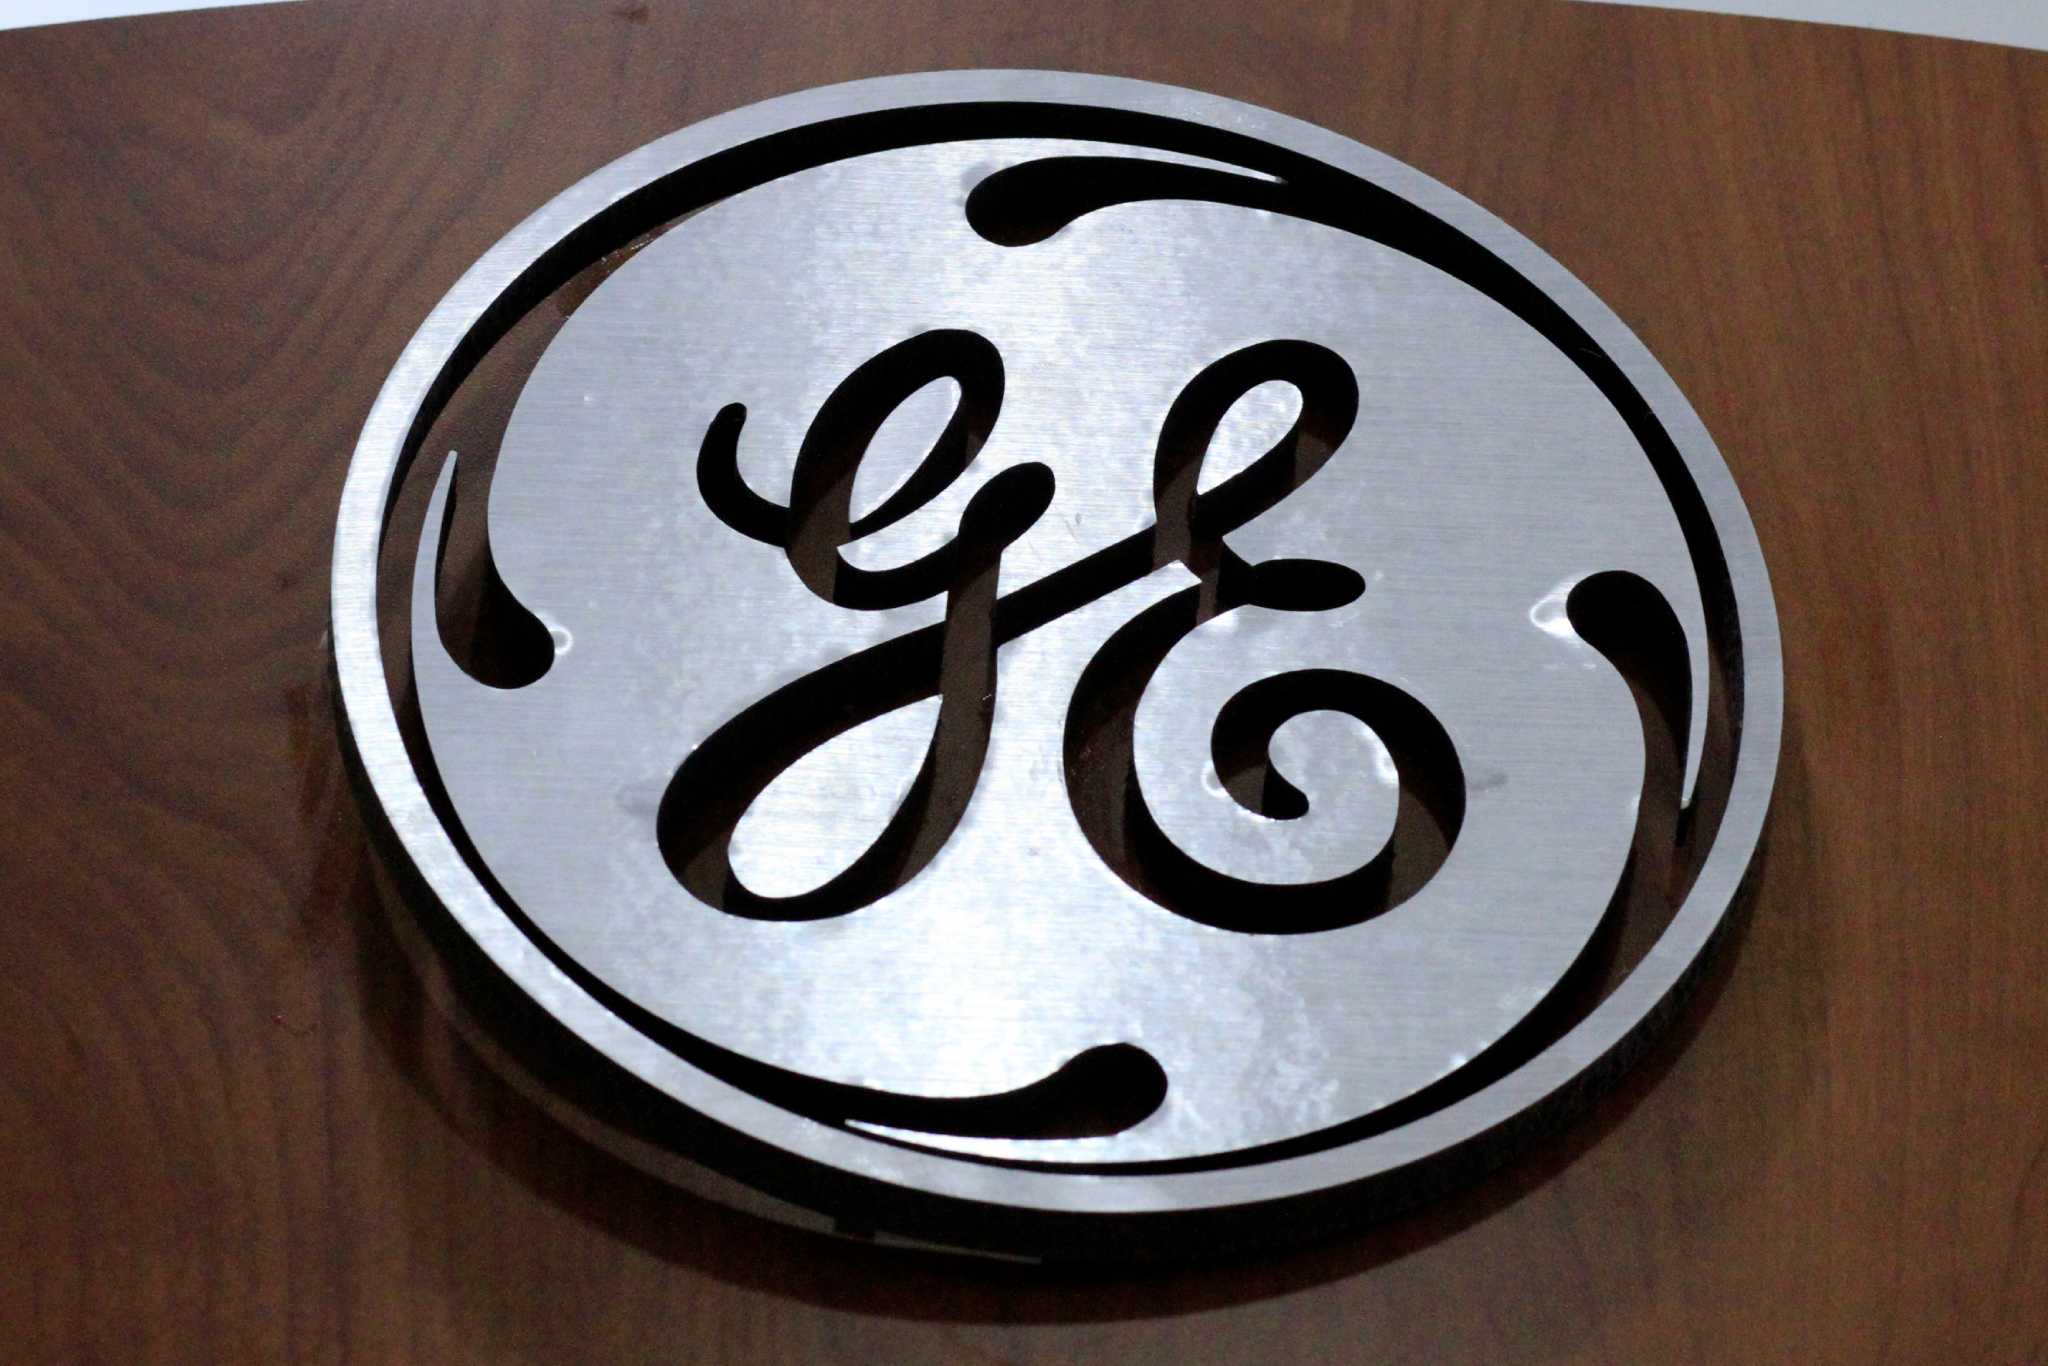 General Electric Inks Deal to Put Its Logo on Celtics Jerseys